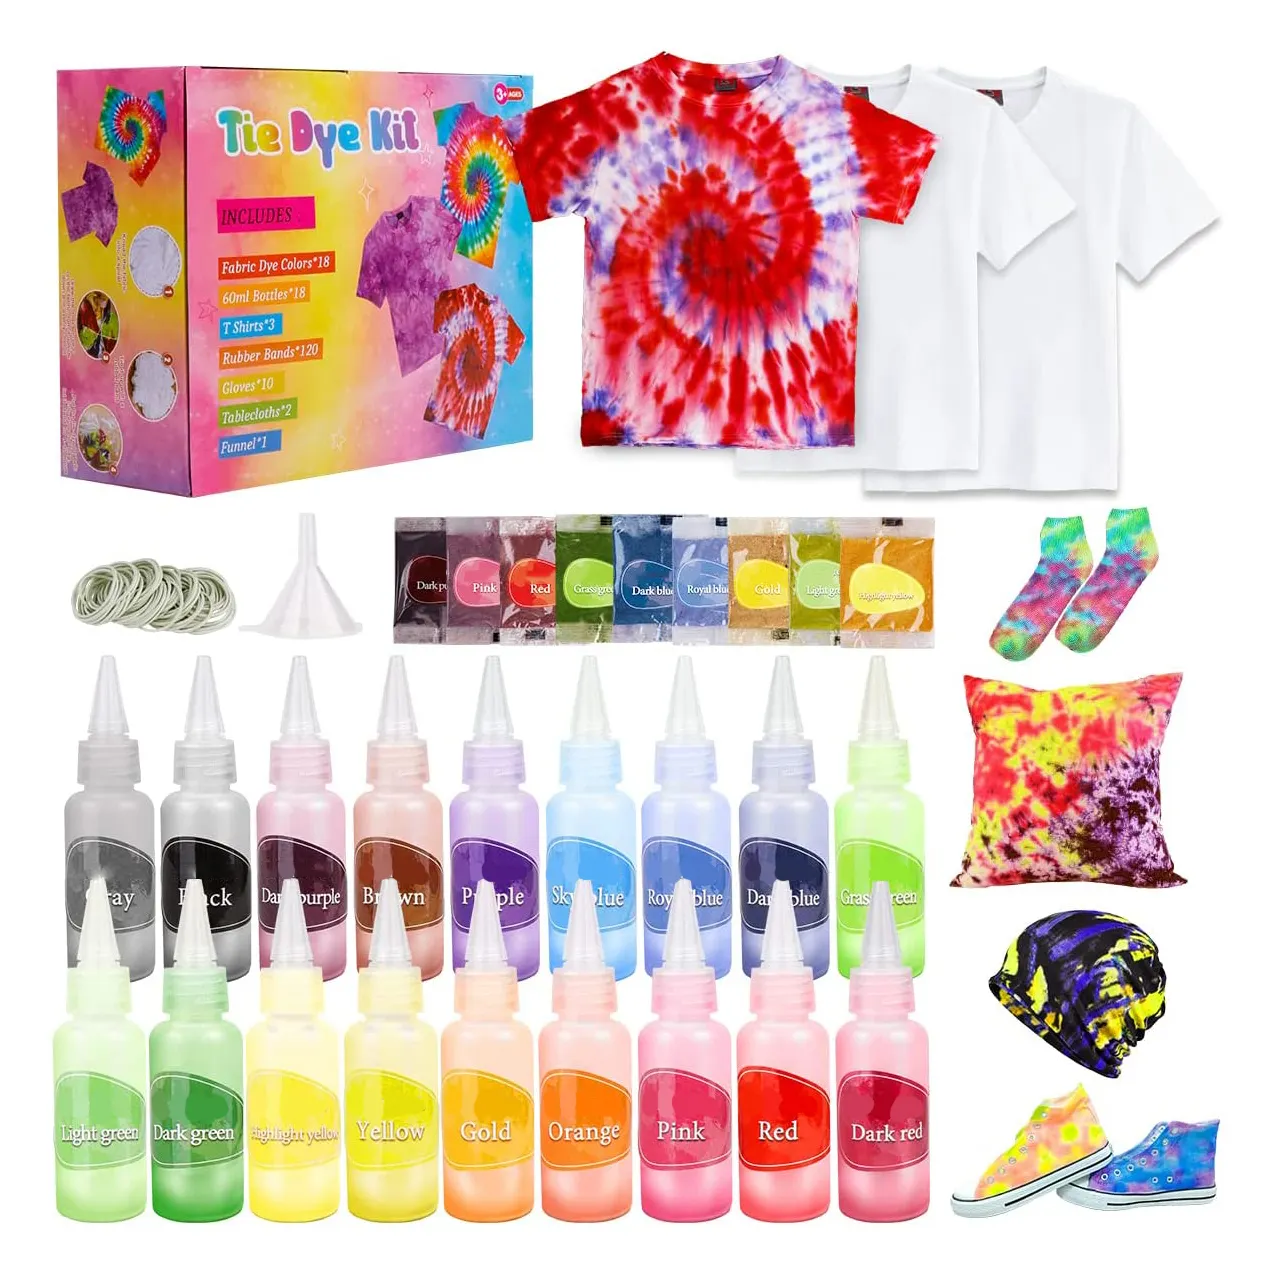 Tie Dye Kit 18 Colours Tie Dye Set with 3 White T Shirt and Socks Tie Dye Craft Set for Kids Crafts Kits for Kids Birthday Gifts